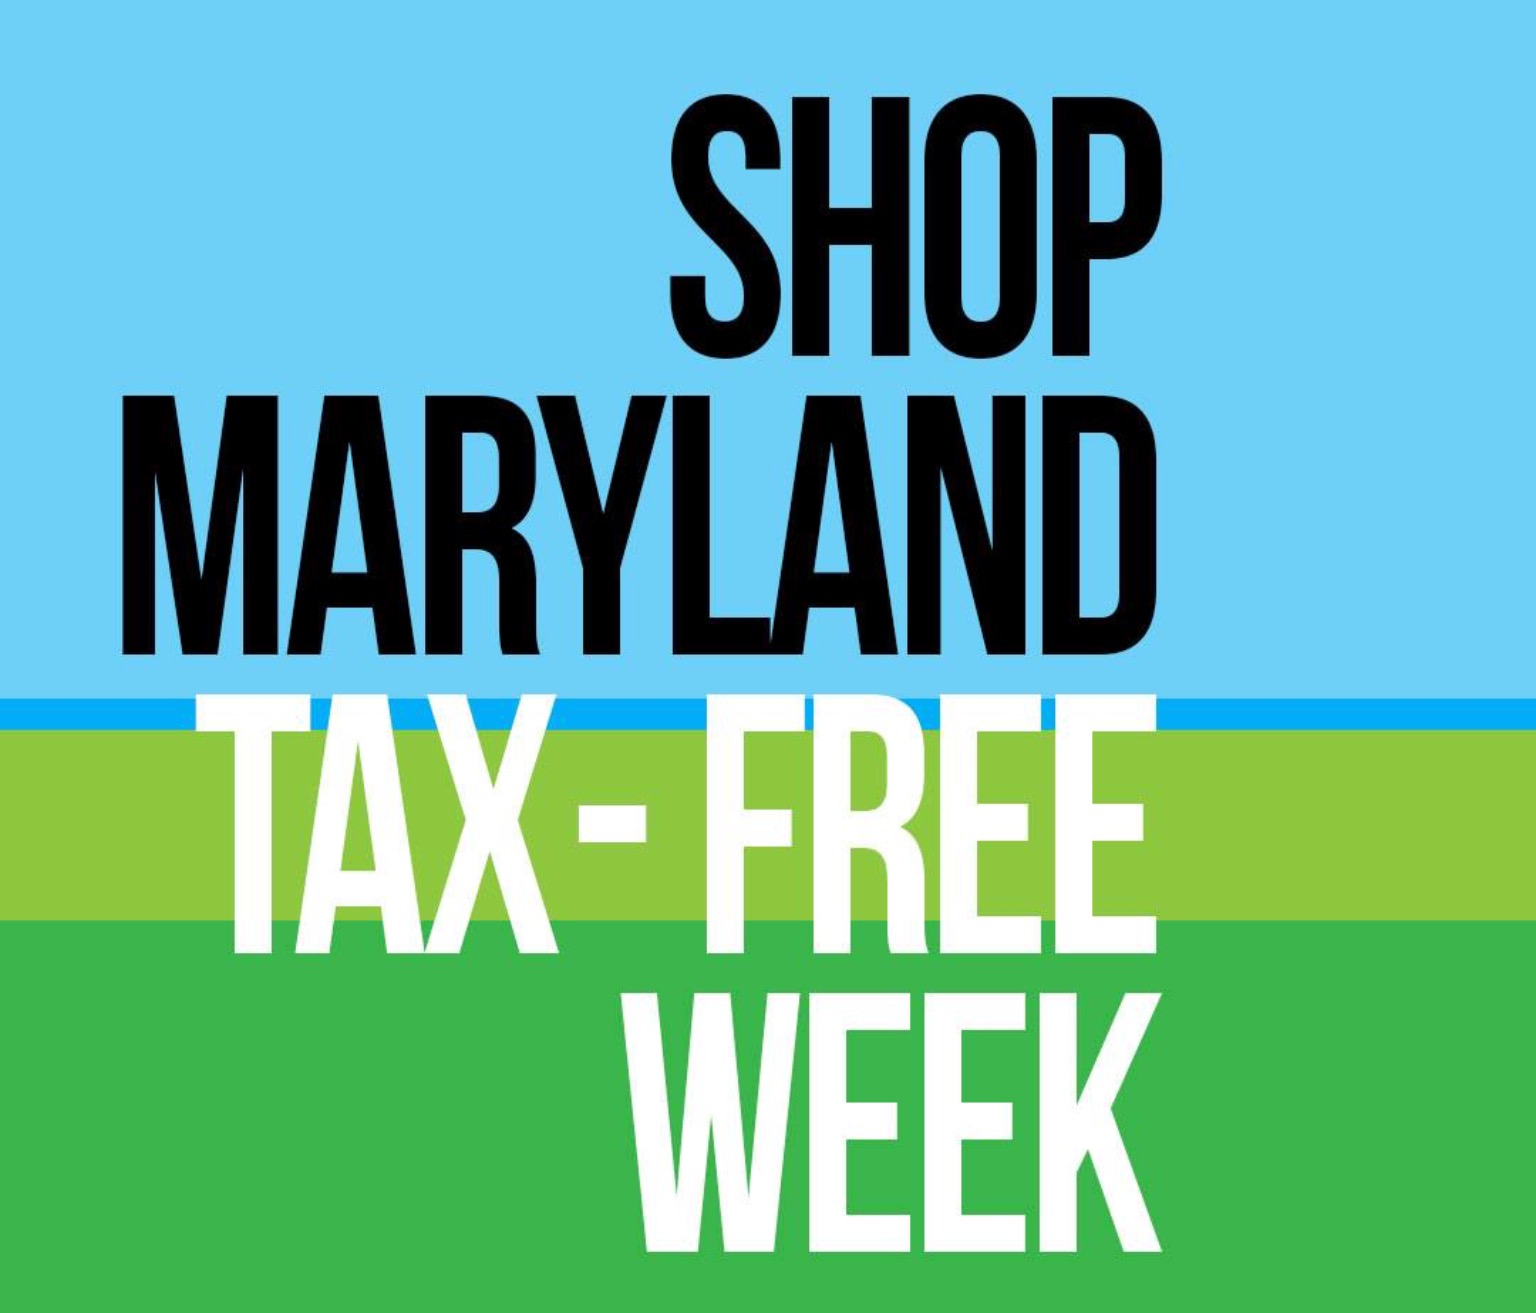 Shop Maryland TaxFree Week August 12 August 18 SHIP SAVES